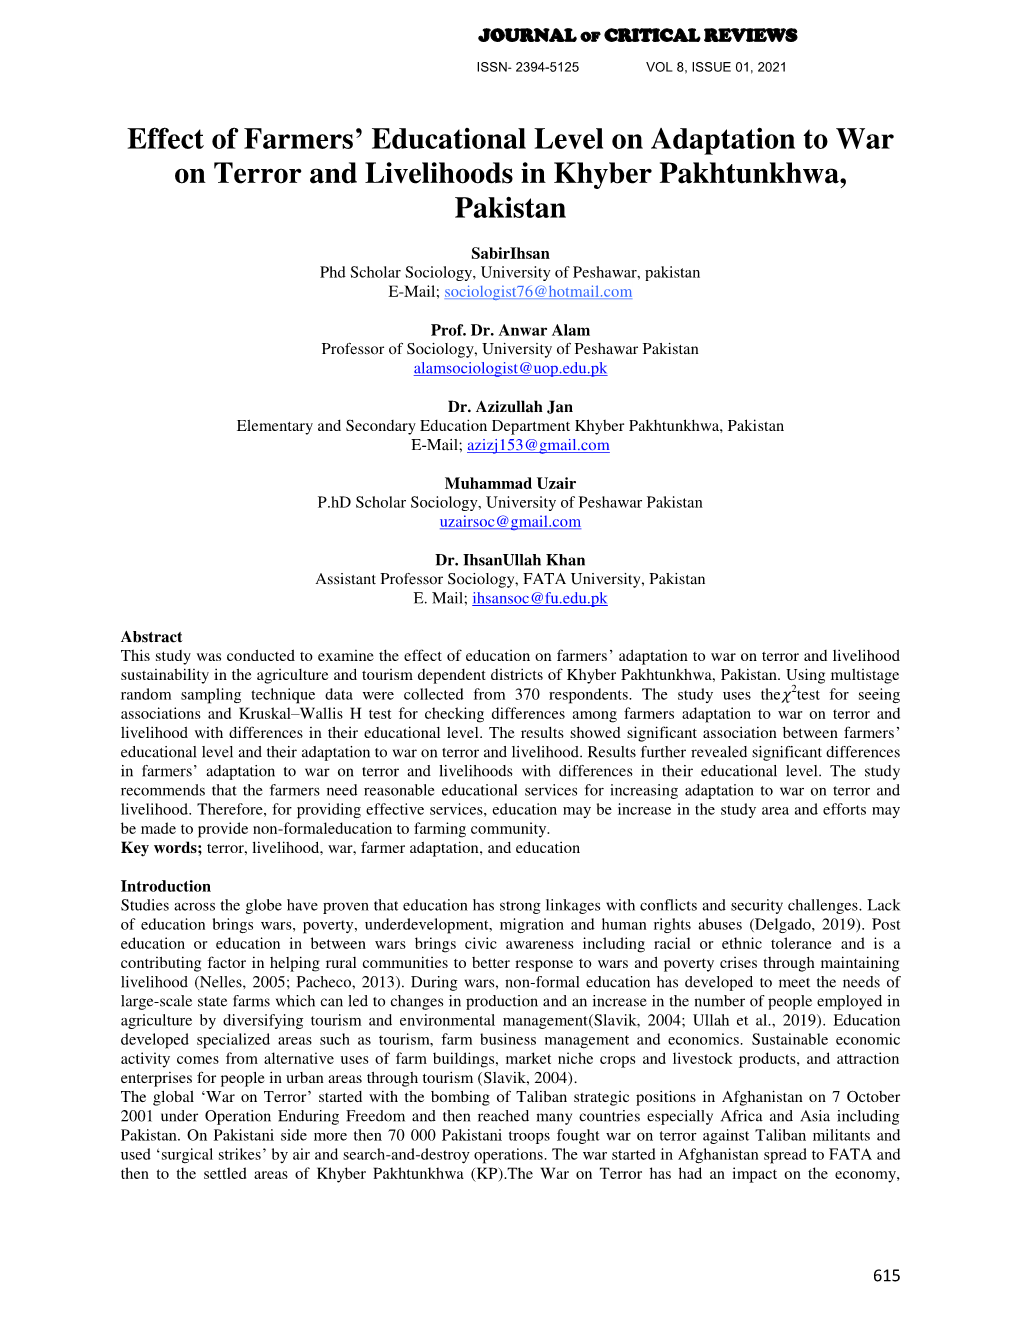 Effect of Farmers' Educational Level on Adaptation to War on Terror And